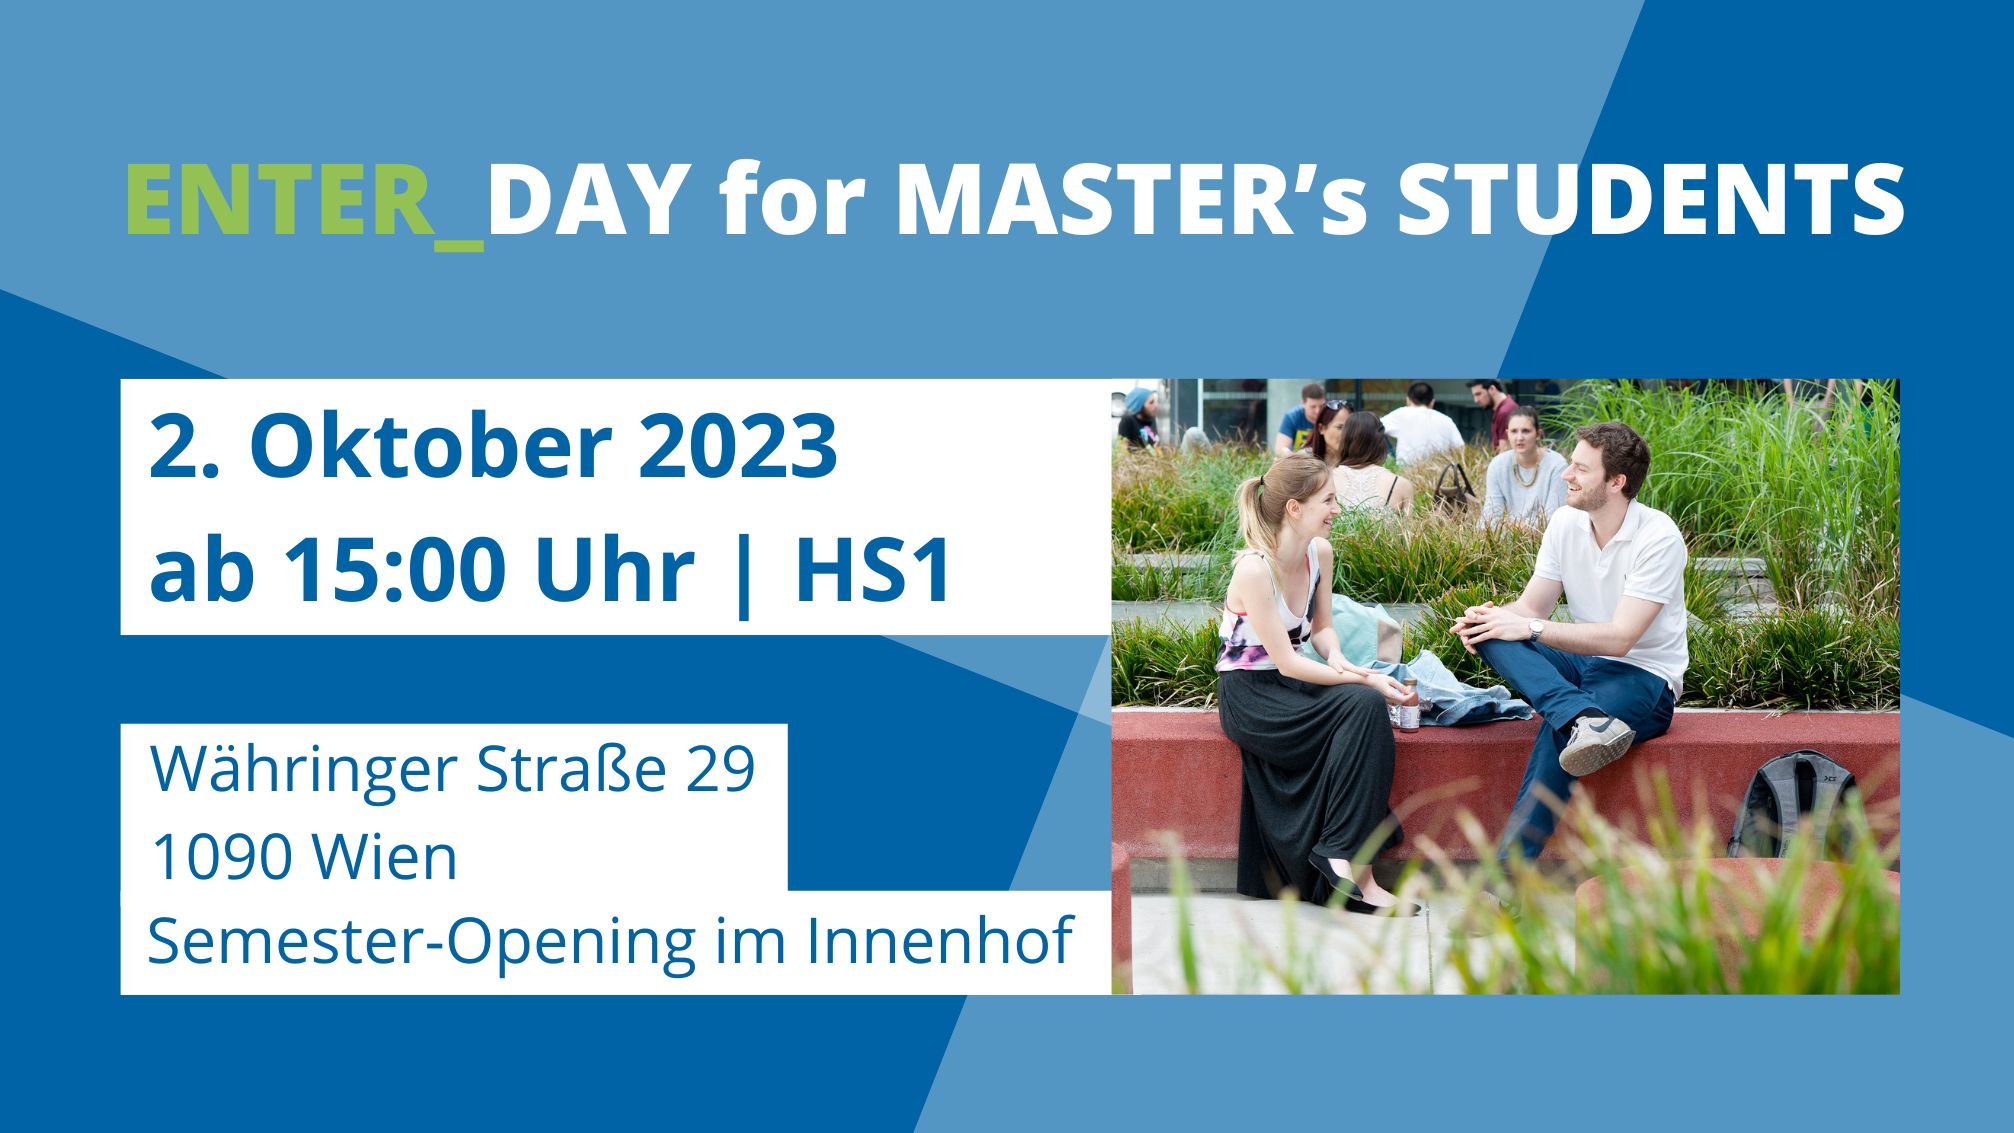 ENTER_DAY for Master's Students on October 2, 2023